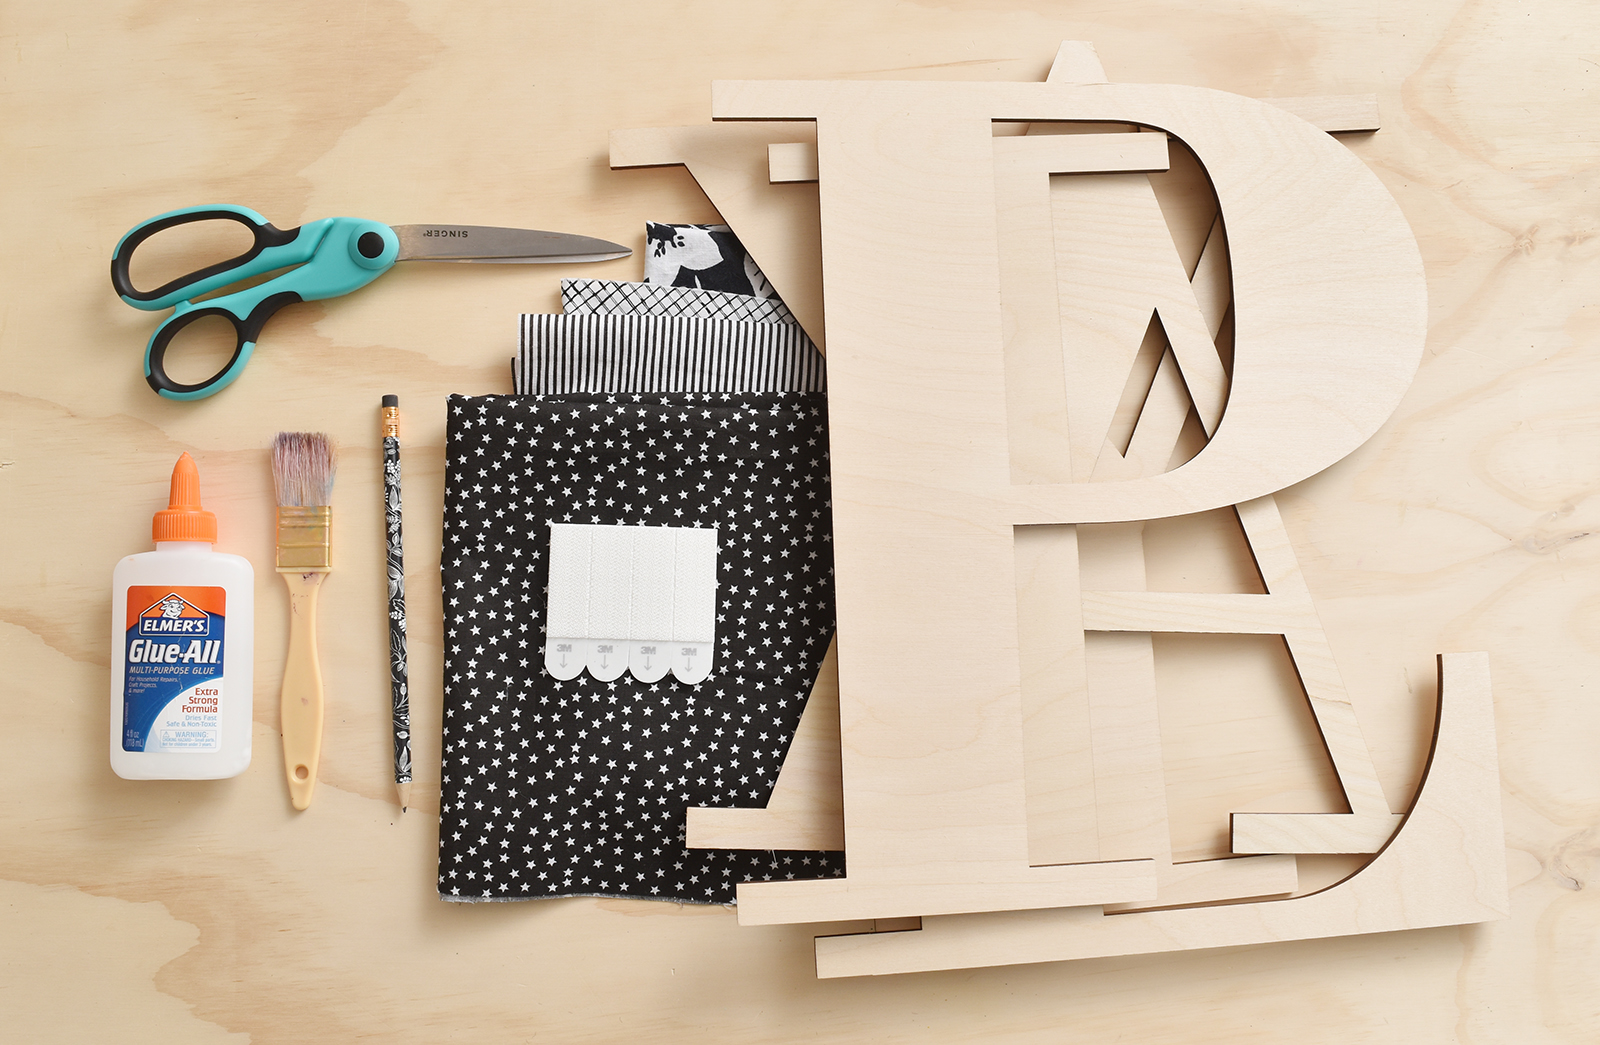 Playroom Update: Easy DIY Fabric-Covered Wooden Letters /// By Design Fixation #typography #home_decor #playroom #kids